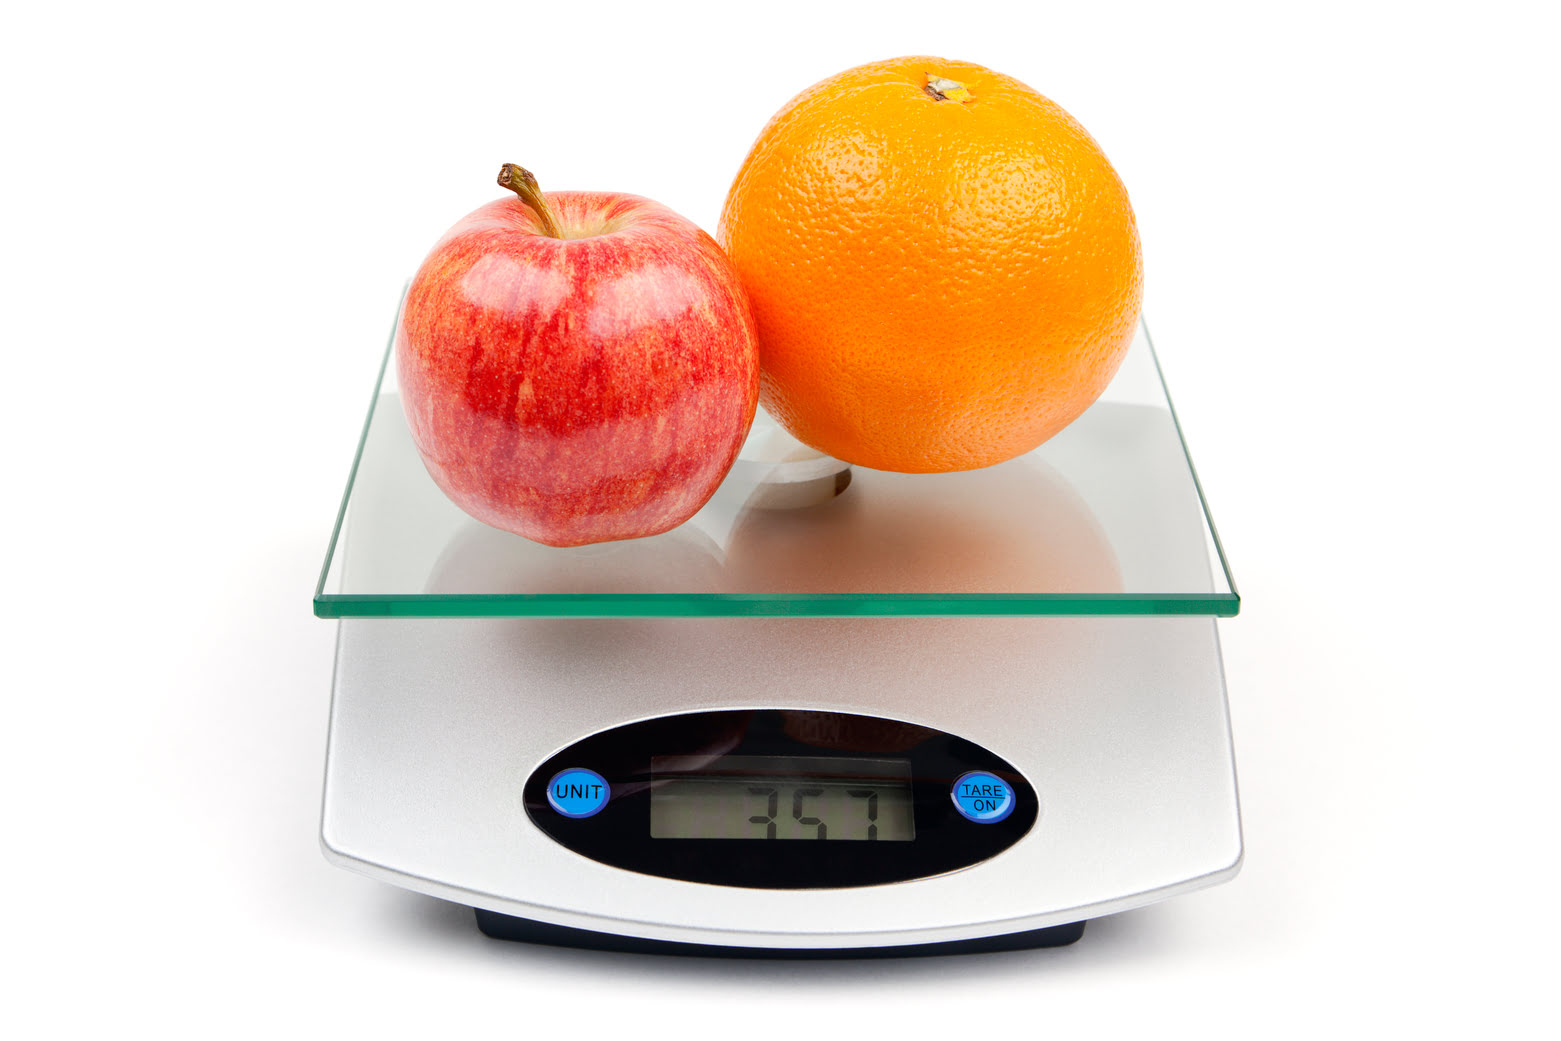 How To Reset A Weight Scale